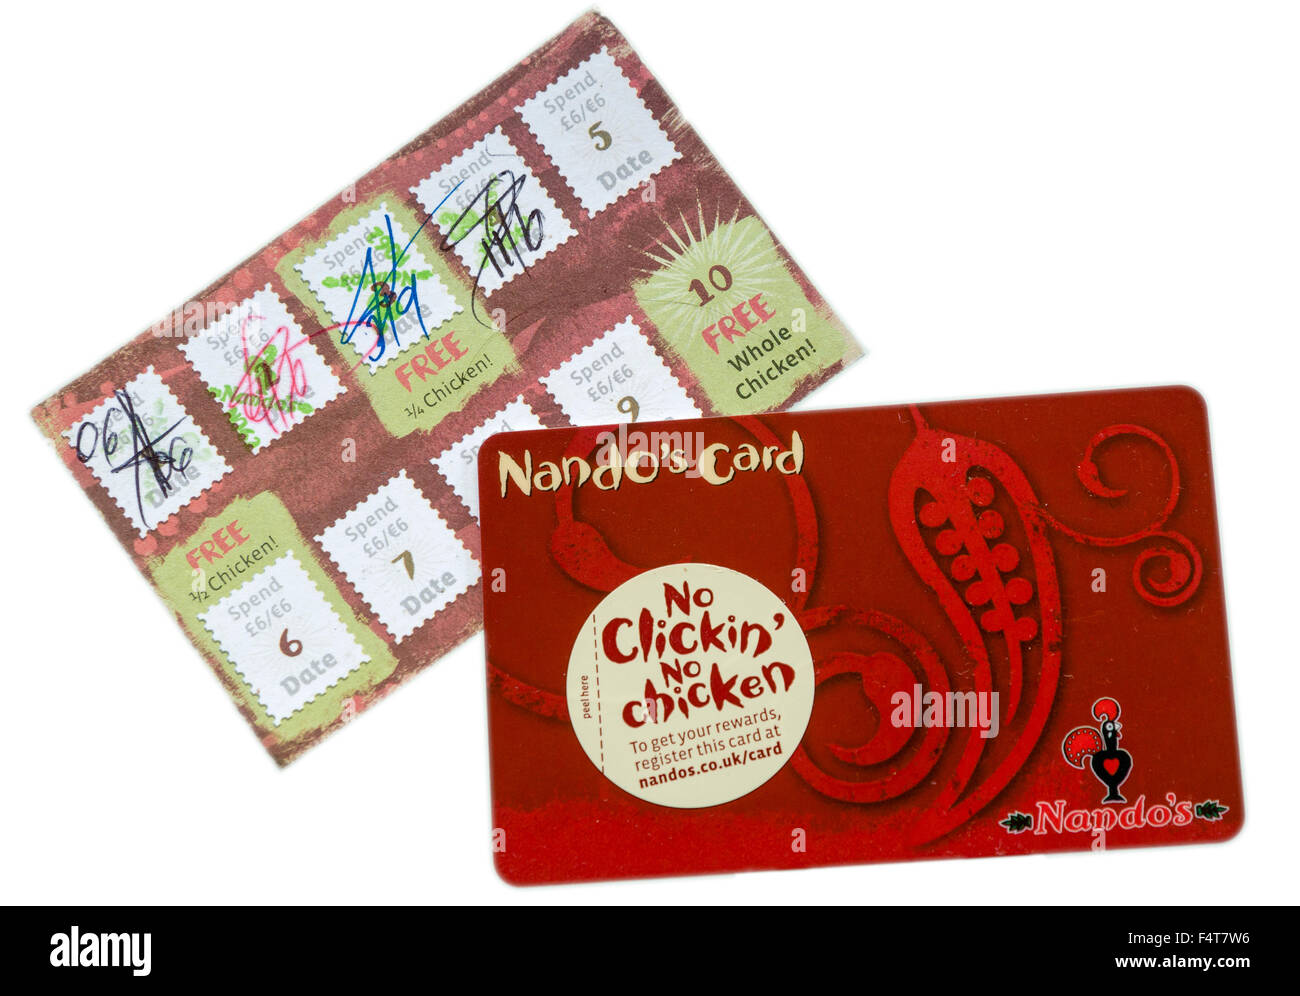 Old style and new style Nando's loyalty cards Stock Photo